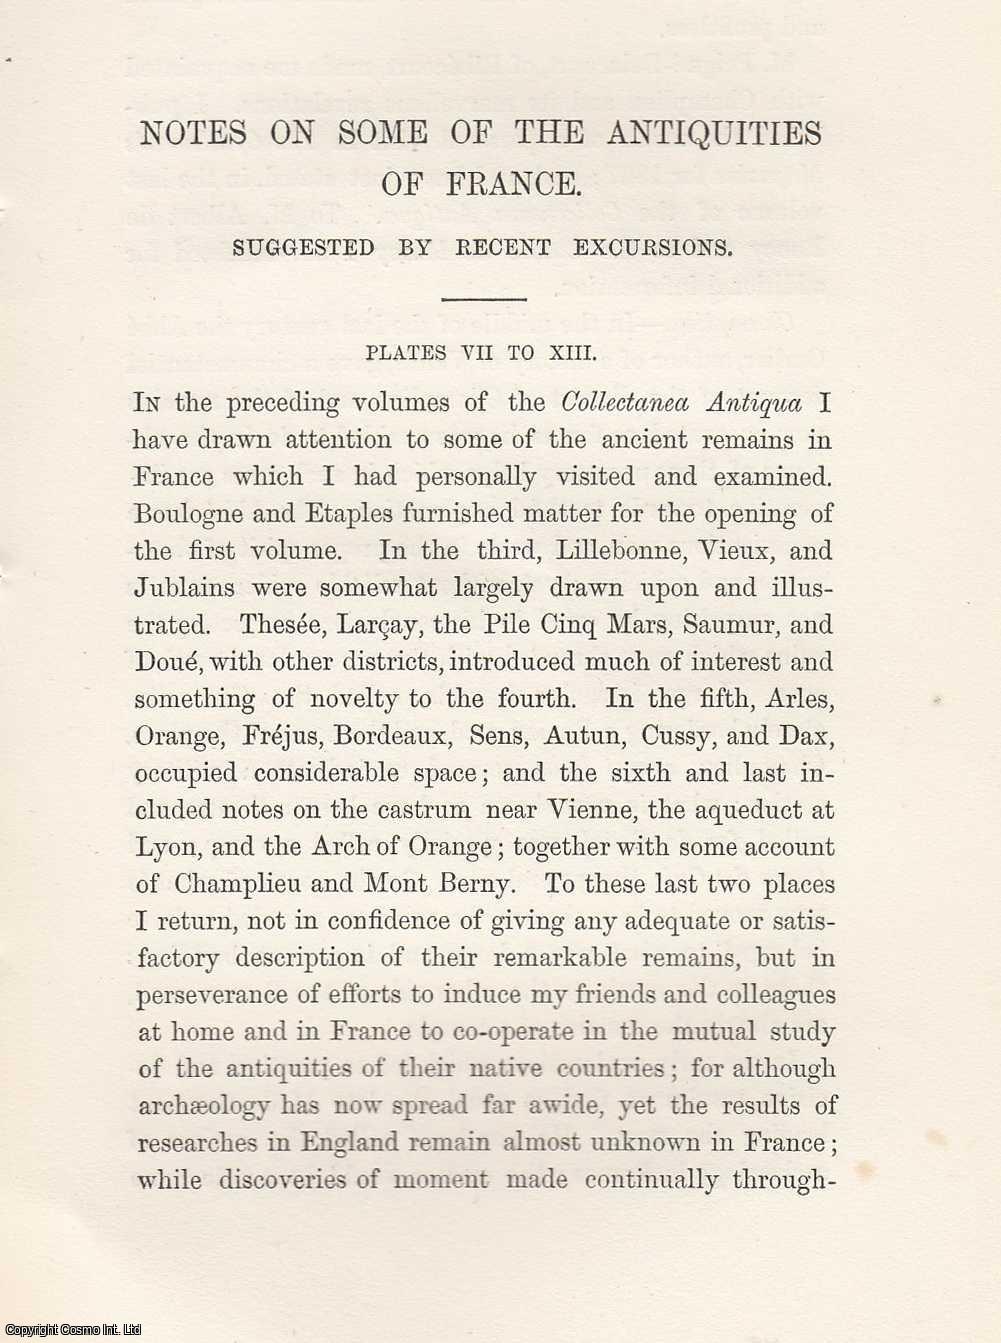 Charles Roach Smith - [1878] Notes on some of the Antiquities of France. A rare article from the Collectanea Antiqua, 1878.